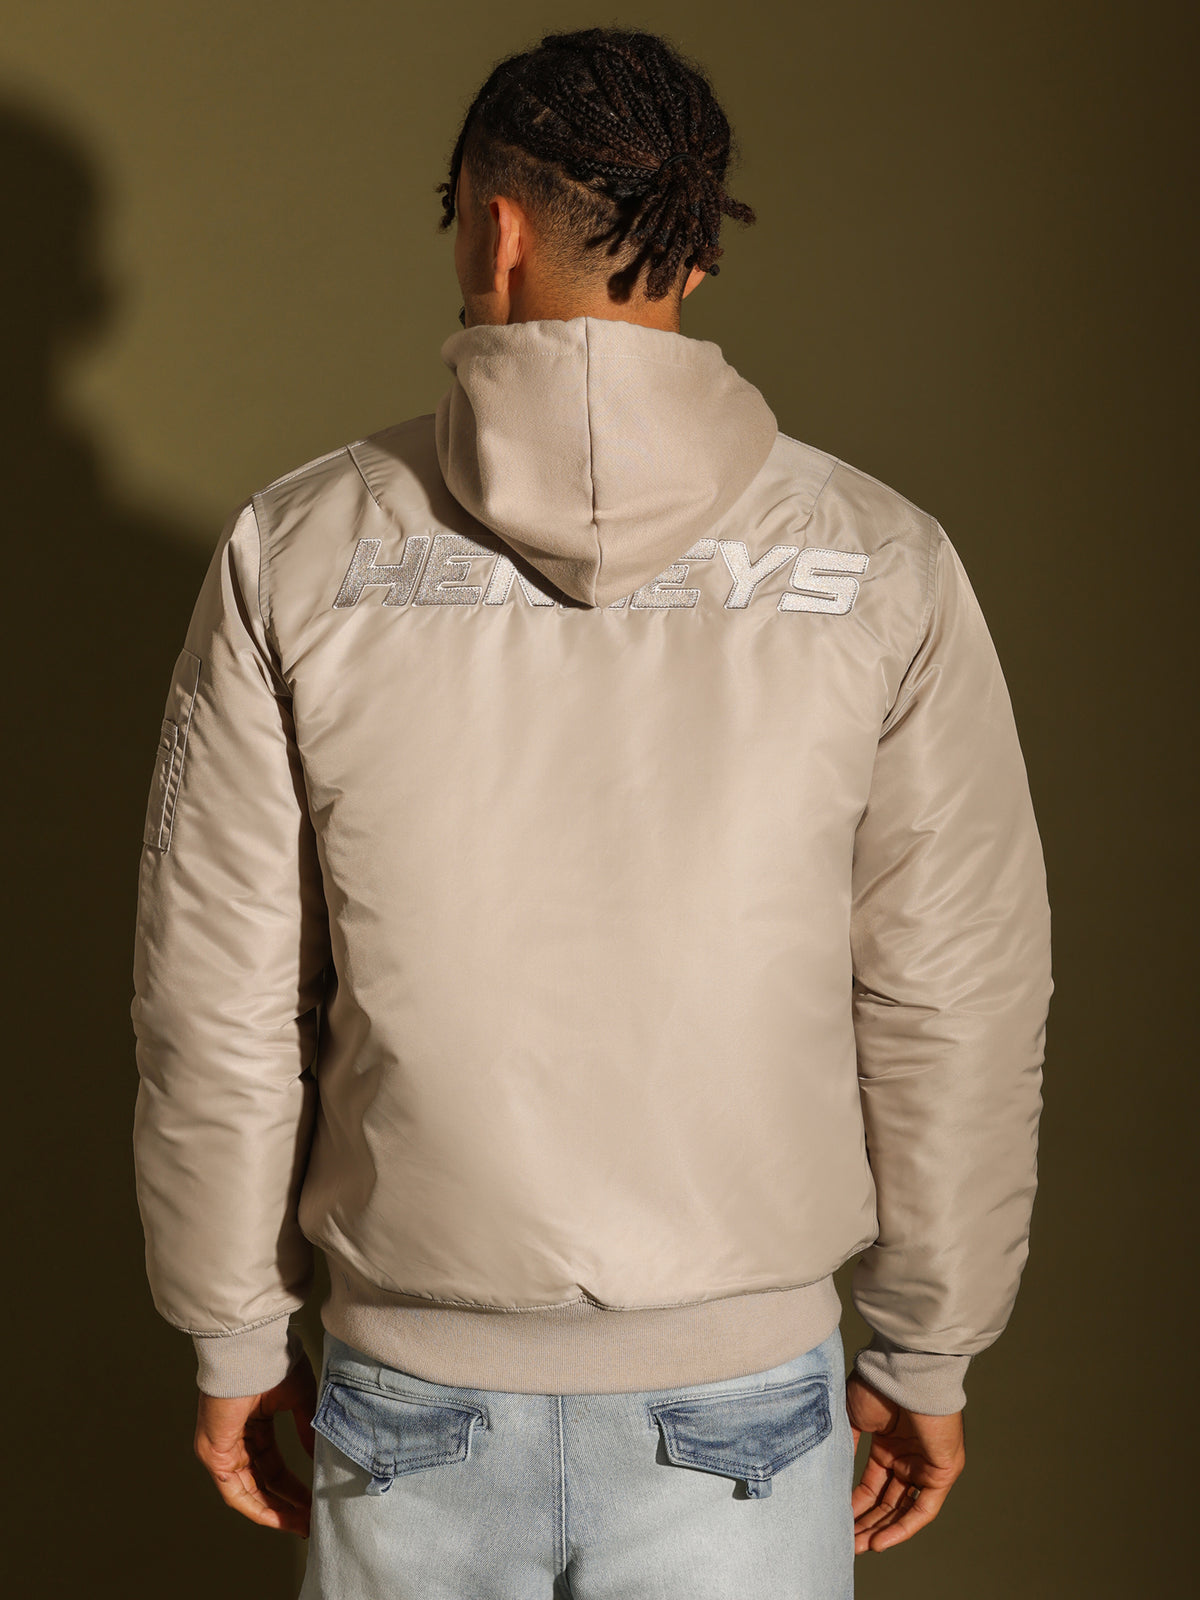 Overdrive Hooded Zip Through in Powder